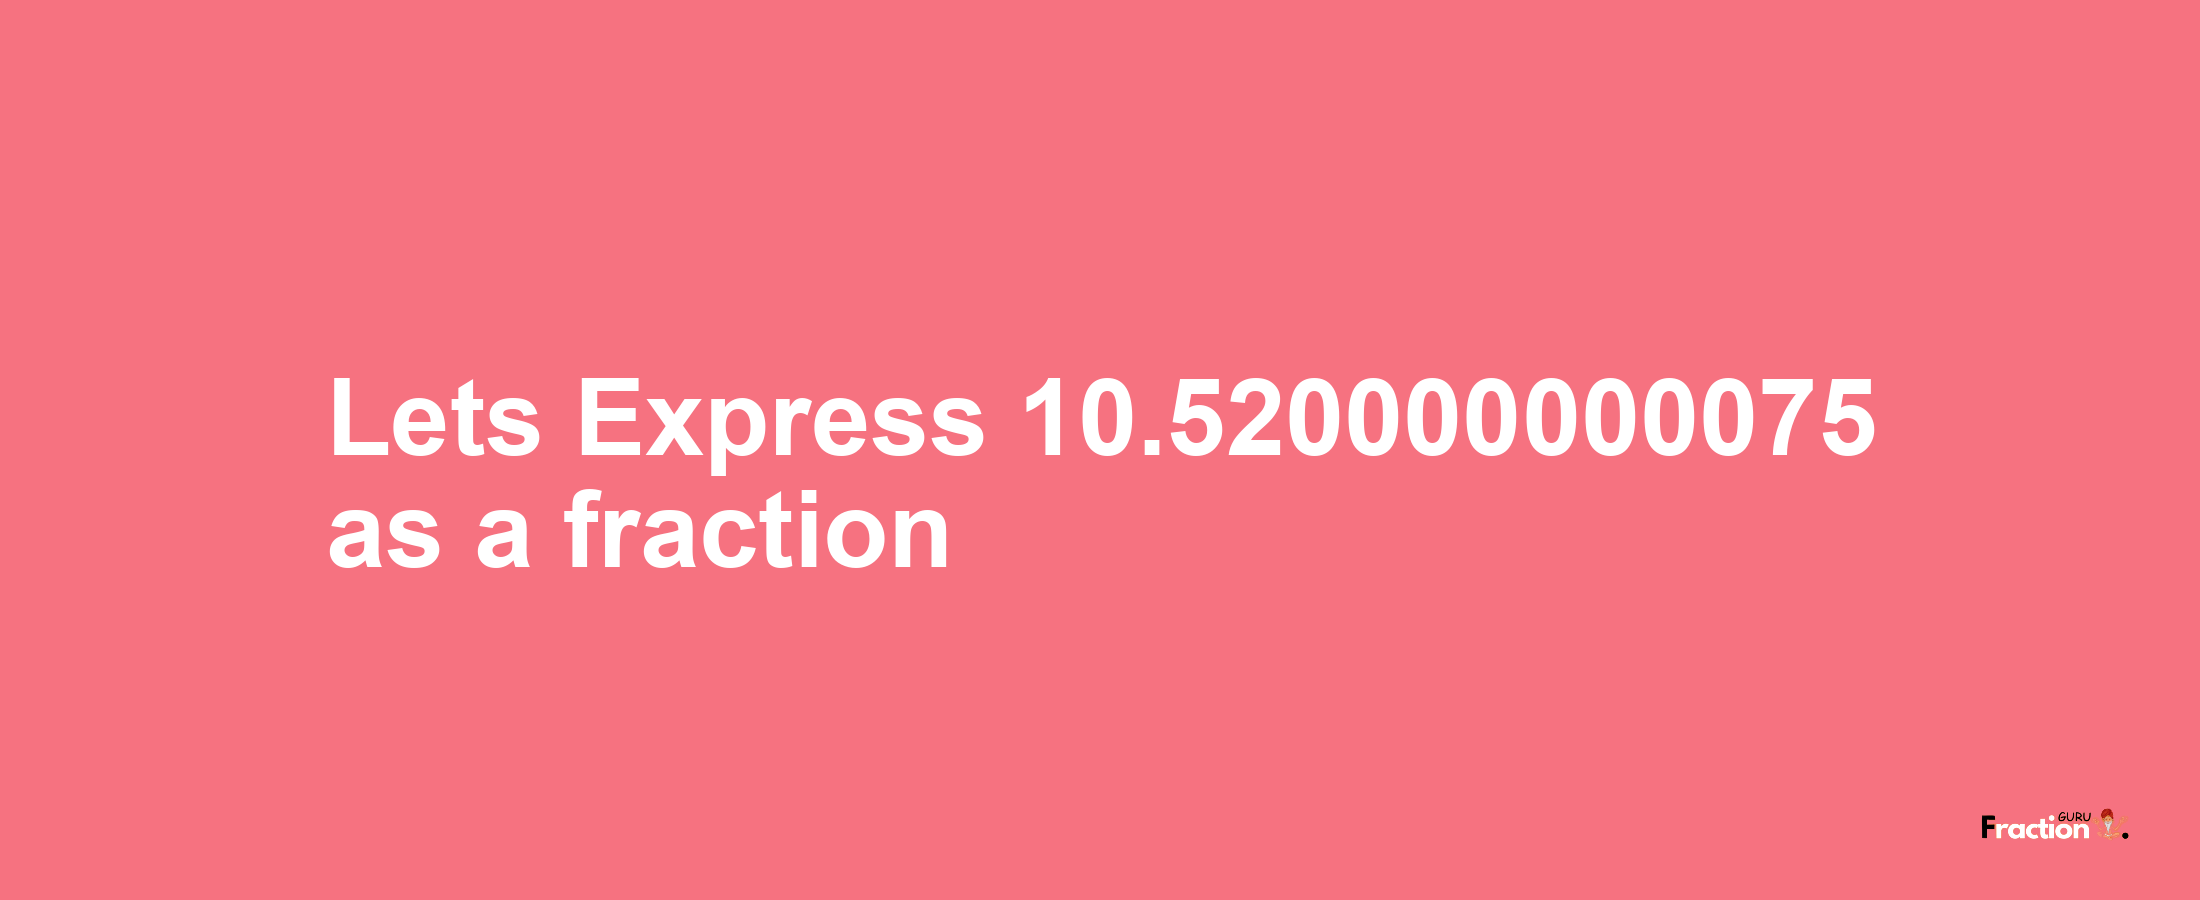 Lets Express 10.520000000075 as afraction